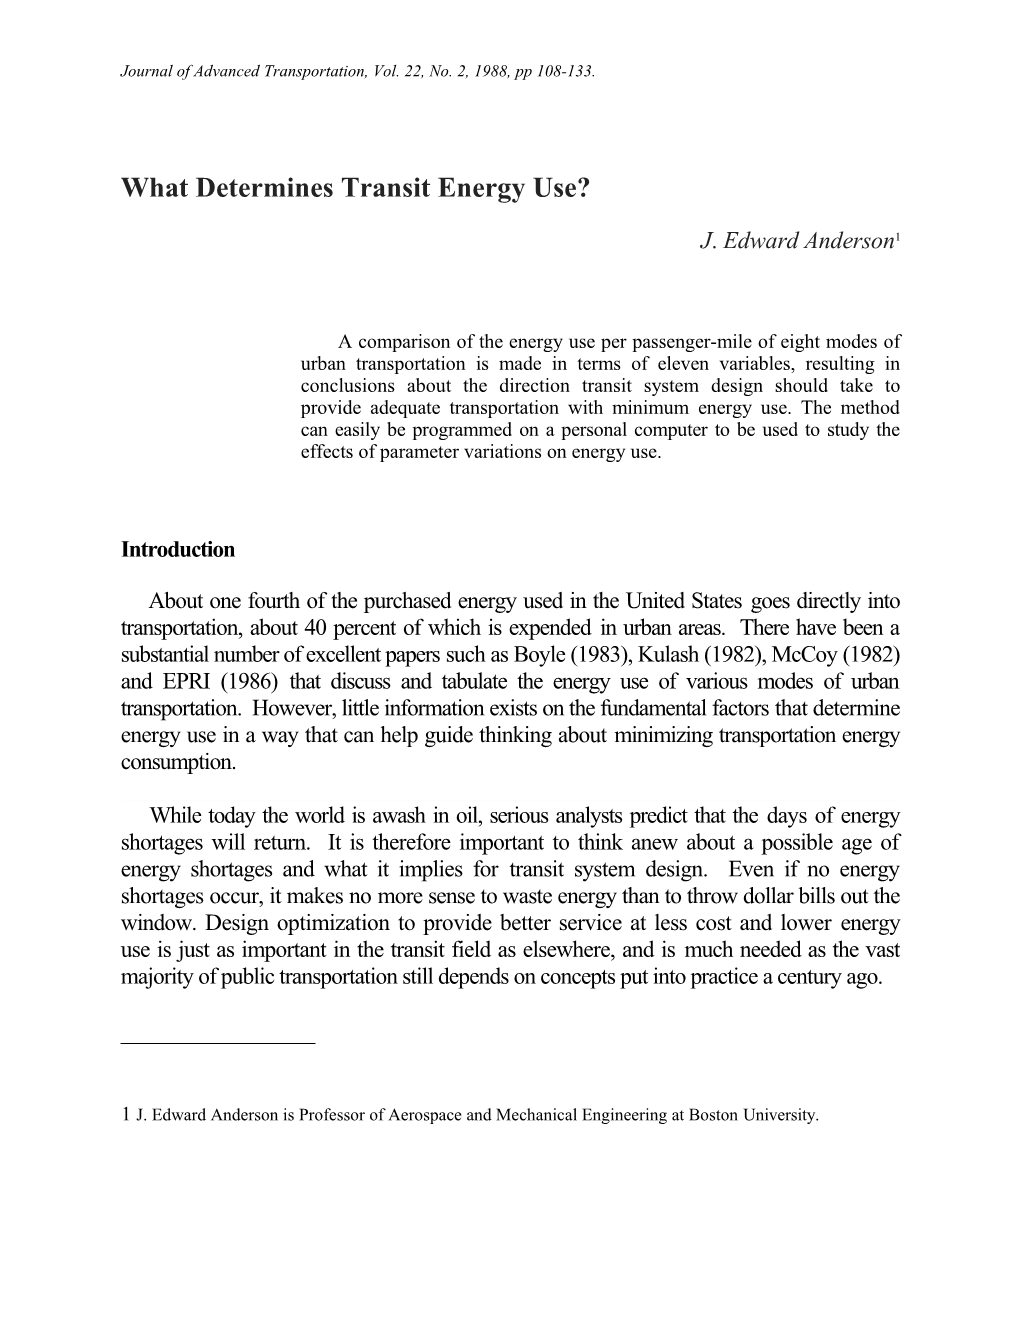 What Determines Transit Energy Use